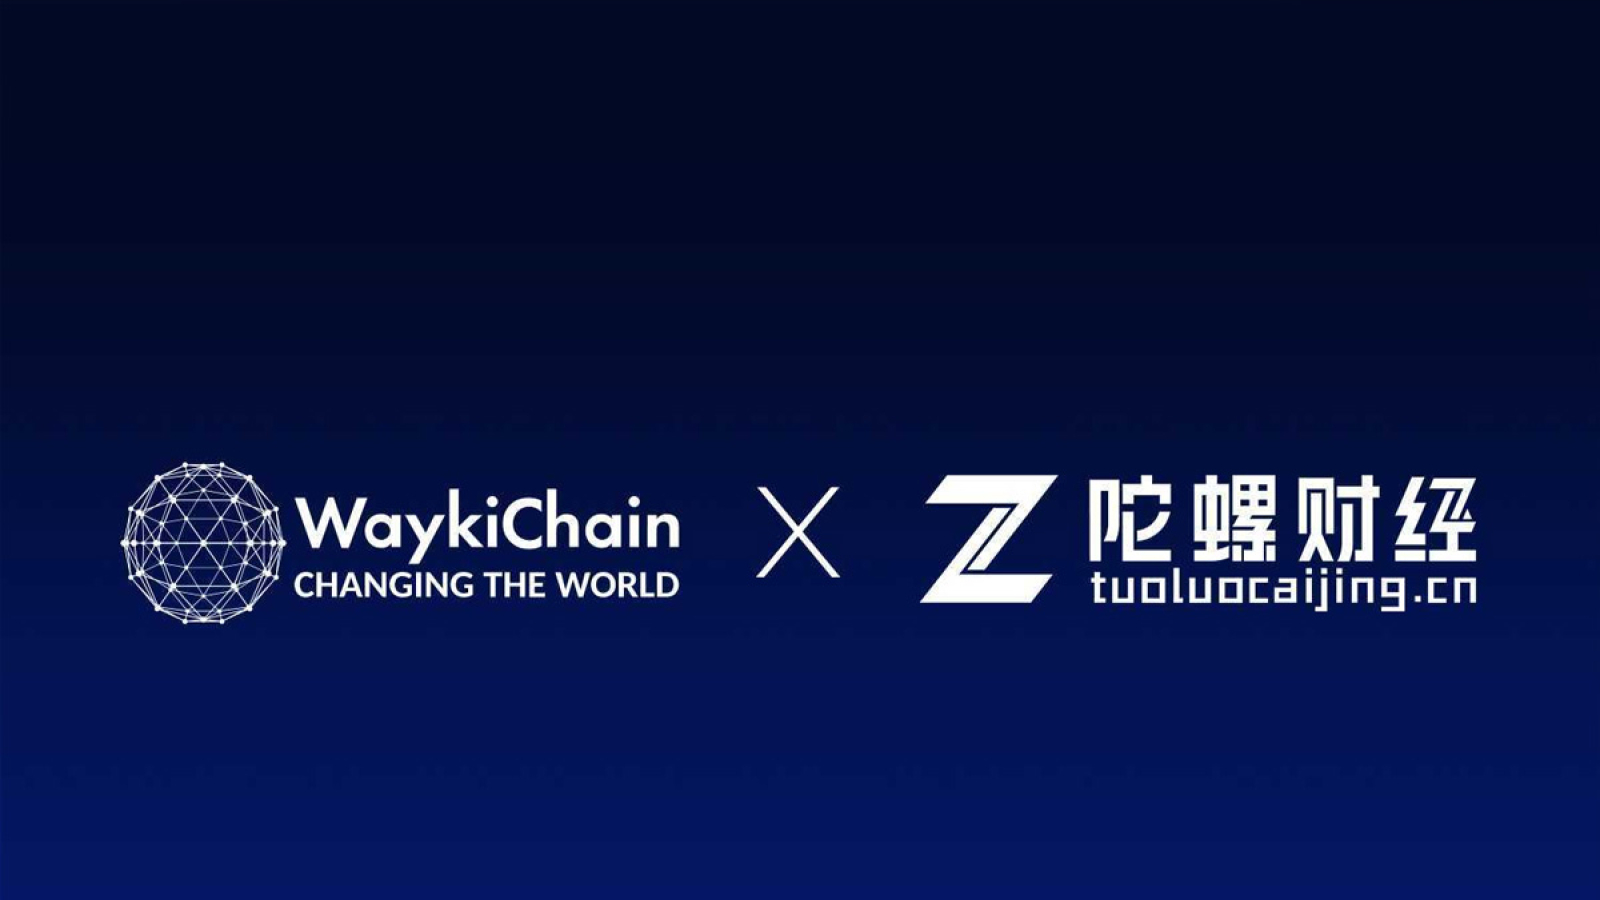 WaykiChain Foundation Announced Its Dividends from Gyro Finance Equity Investment